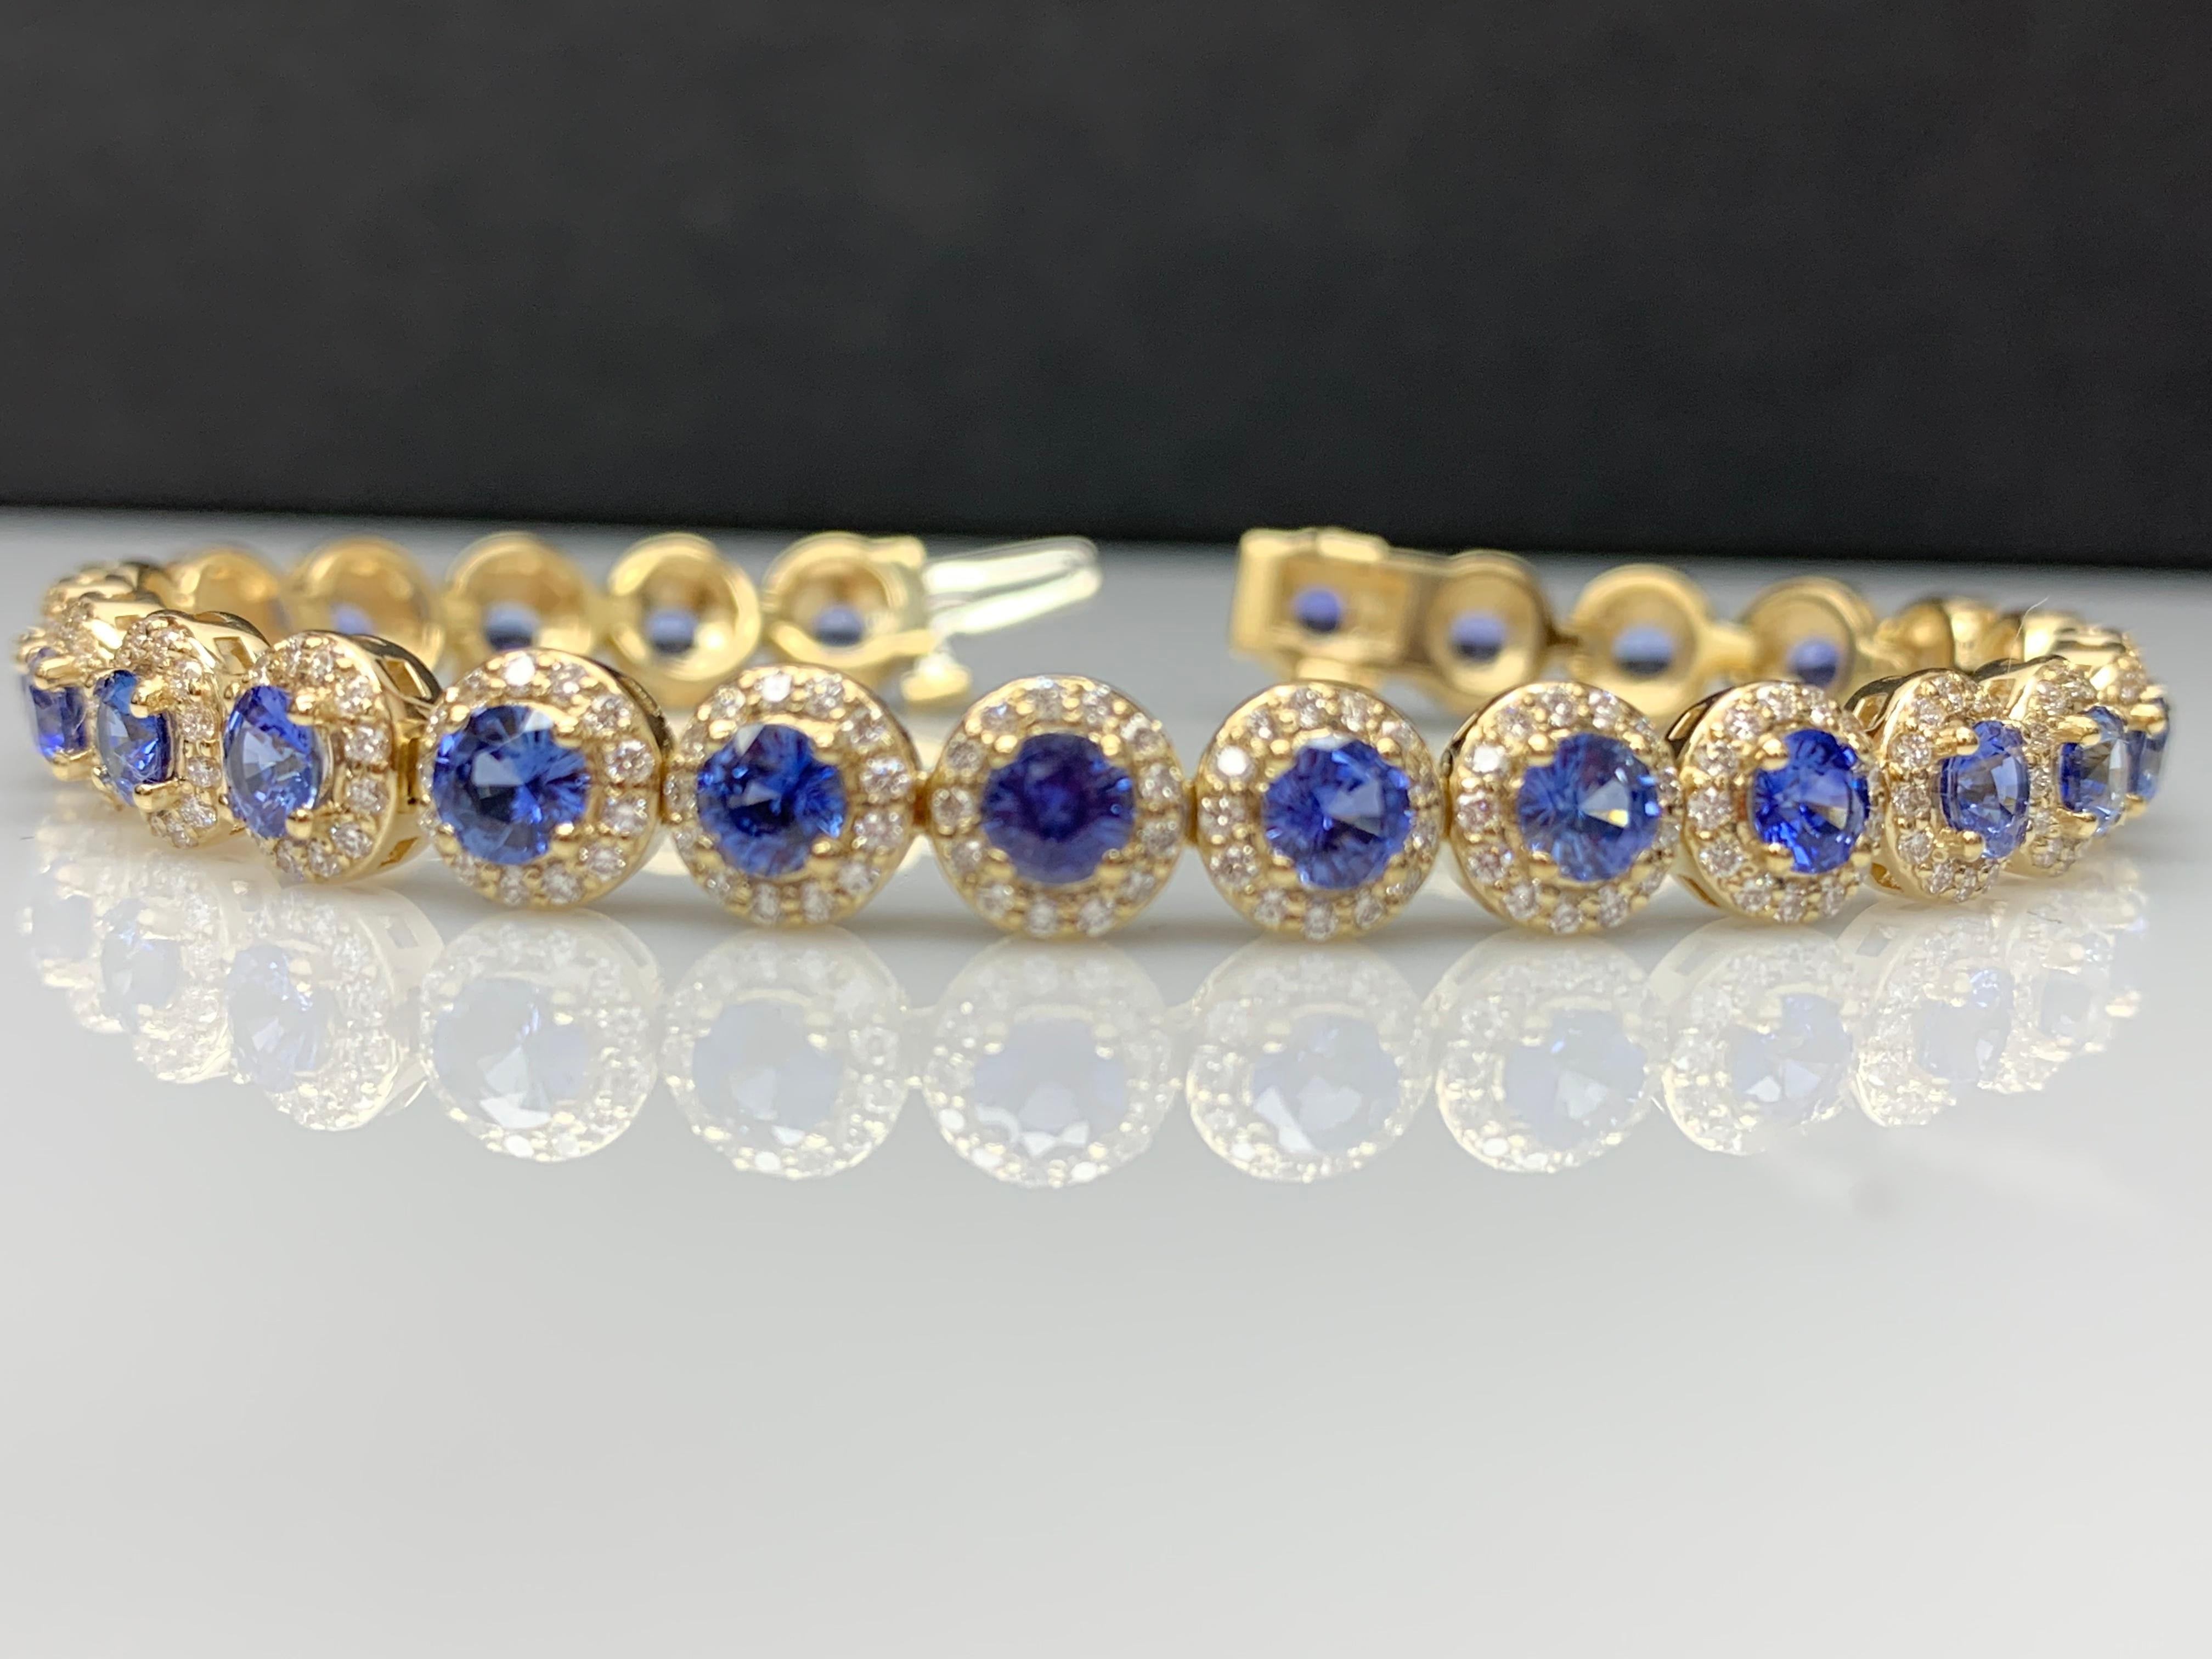 7.47 Carat Blue Sapphire and Diamond Halo Tennis Bracelet in 14k Yellow Gold For Sale 3